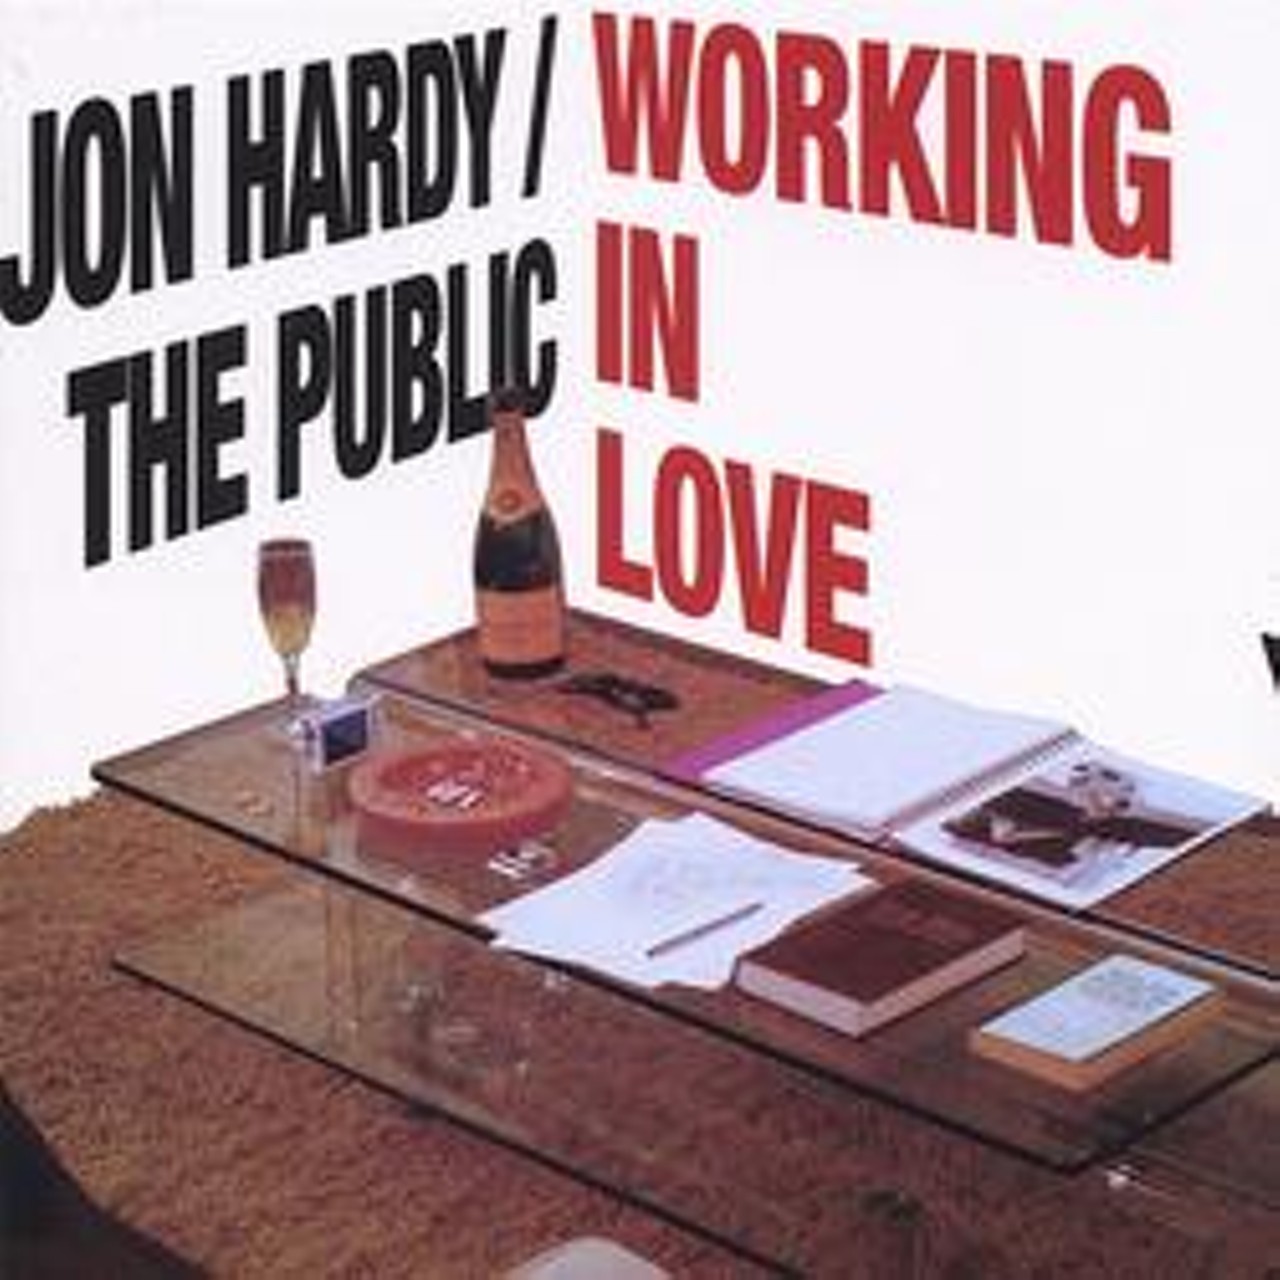 Jon Hardy and the Public, winners of Best Local Album of the Past 12 Months for Working in Love.